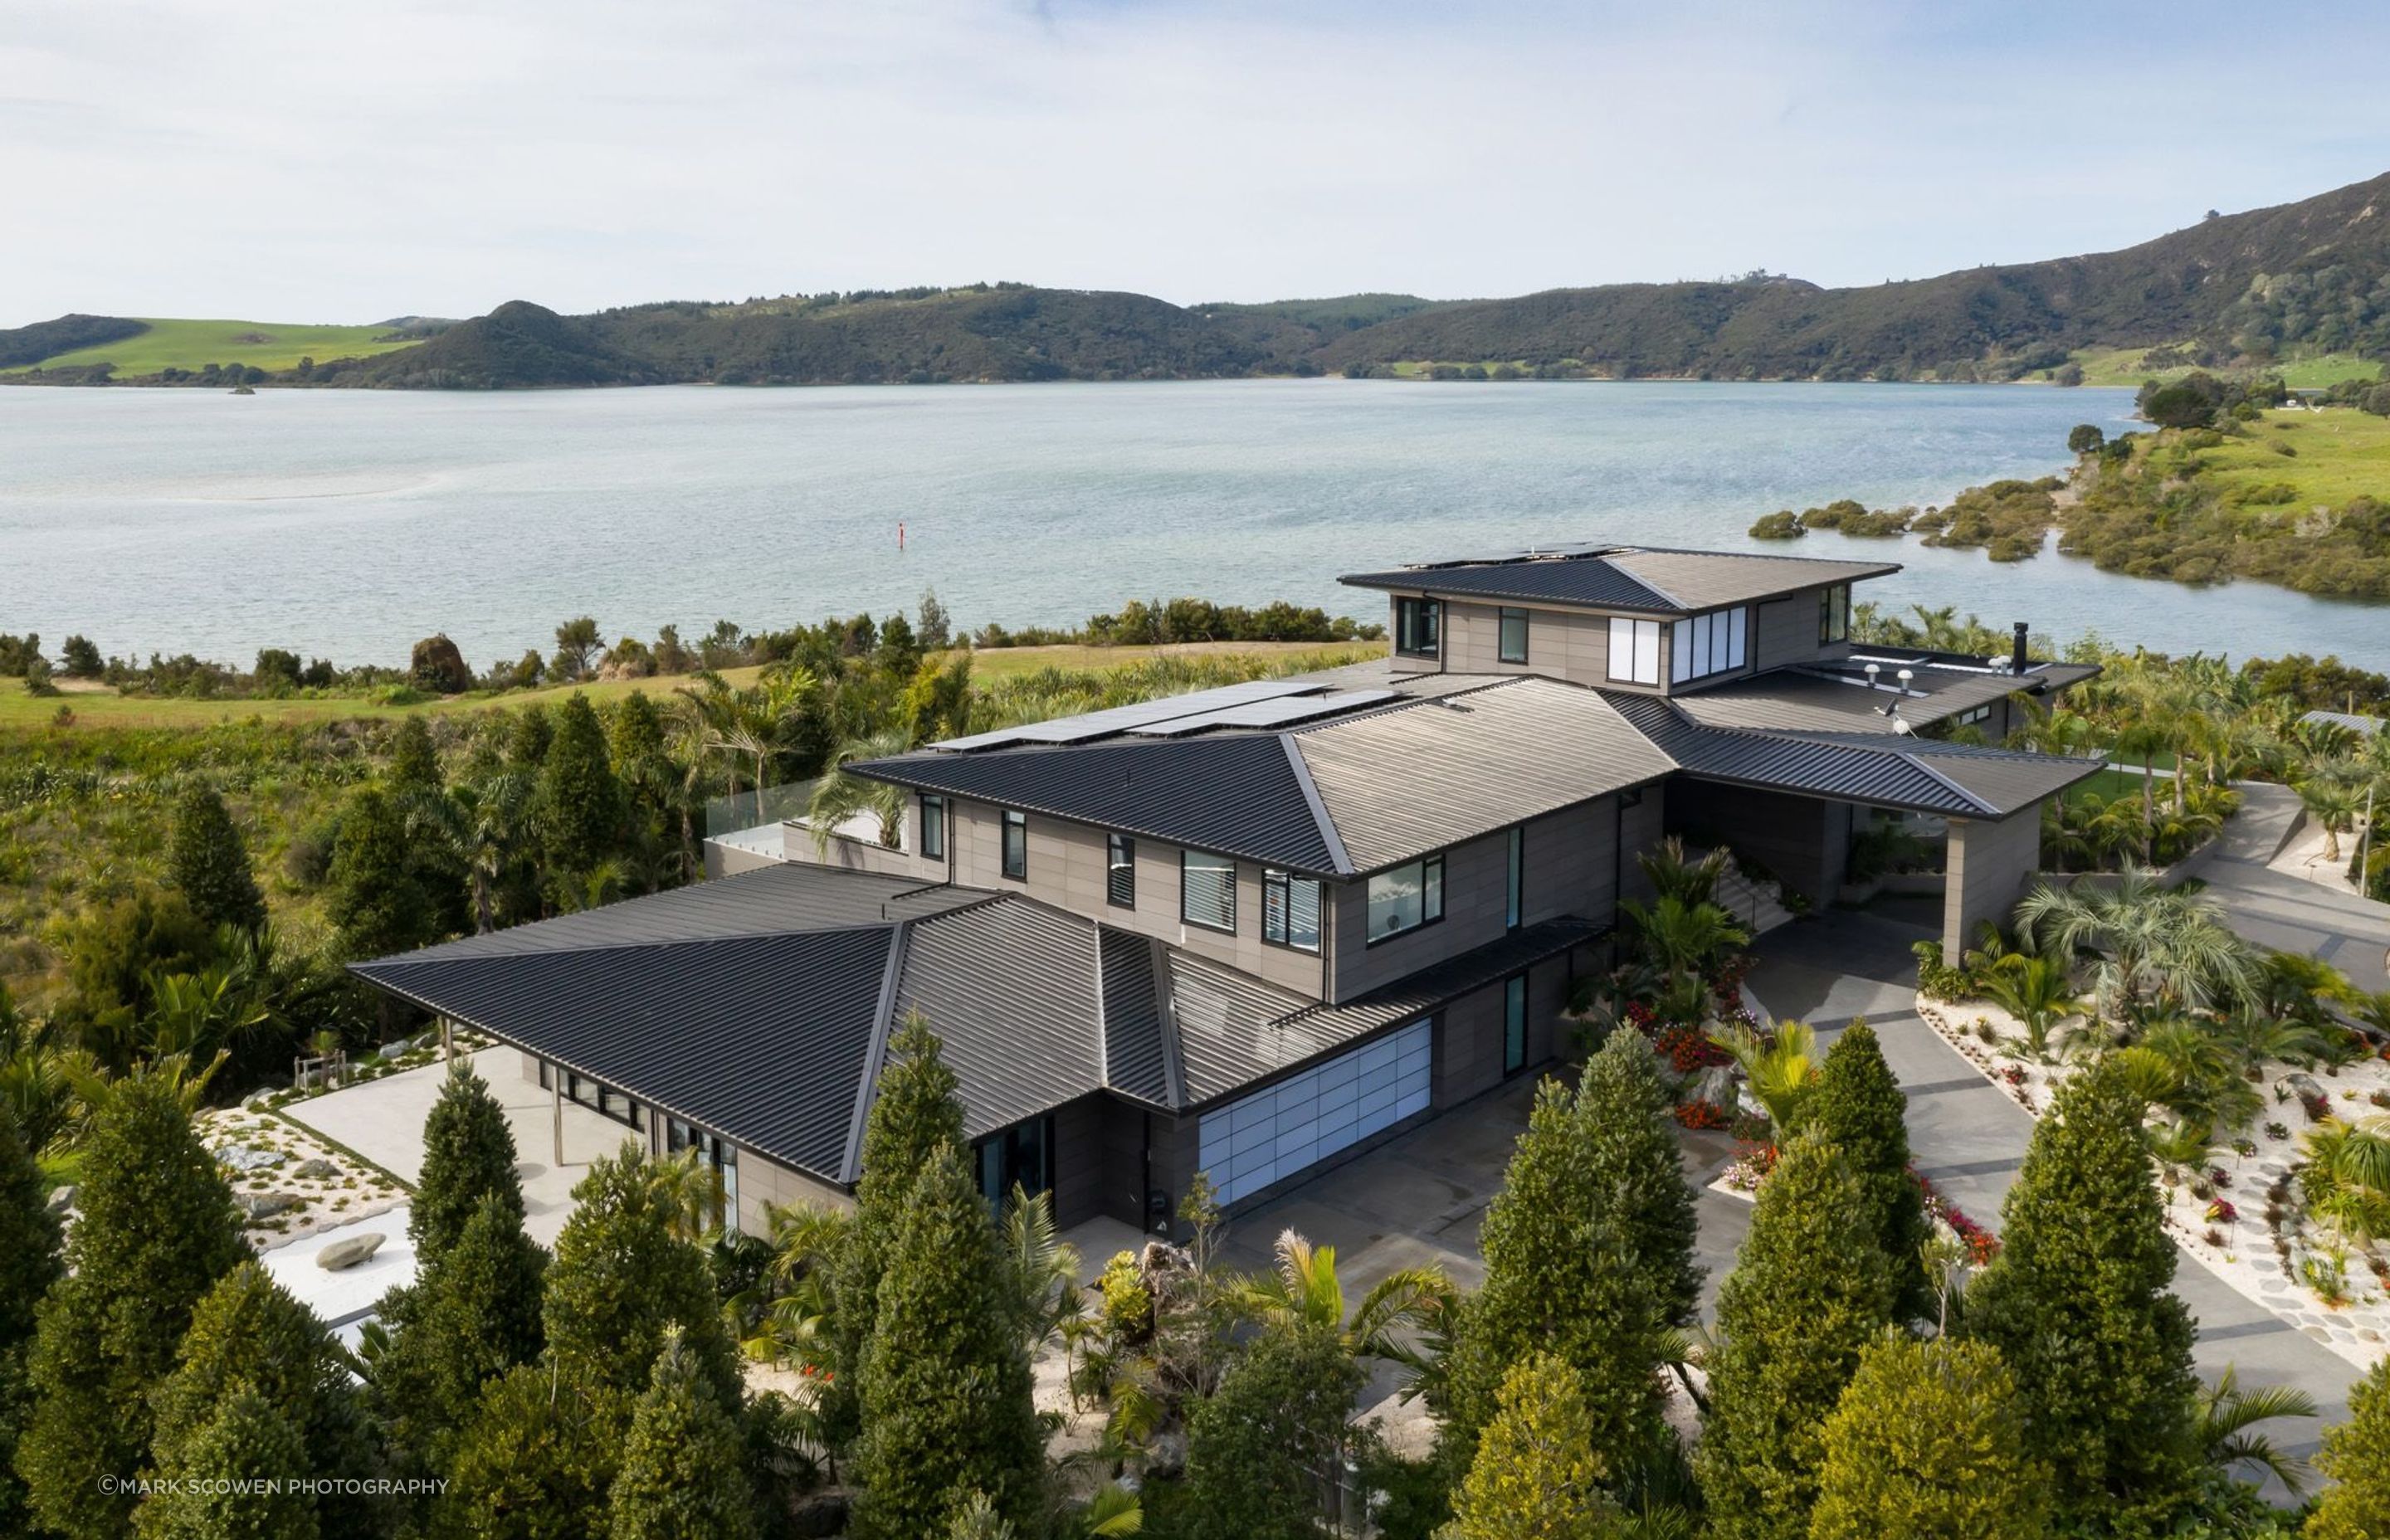 Three Kings House is located within forty-one acres of sub-tropical, Japanese and sculpture gardens on the Houhora Harbour in the Far North of New Zealand.